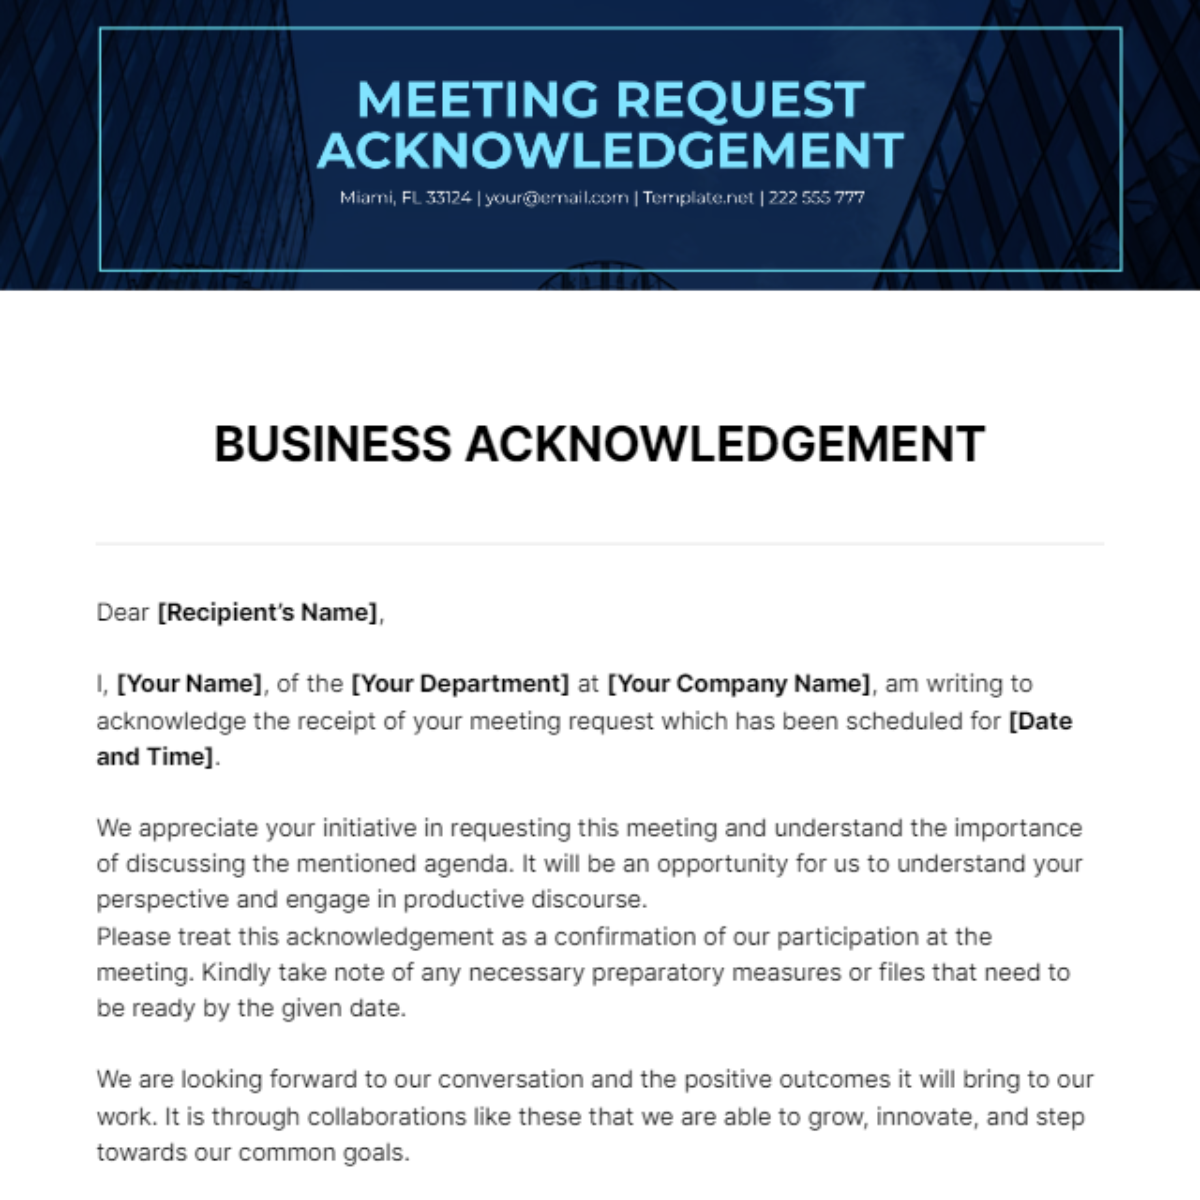 Business Acknowledgement Template